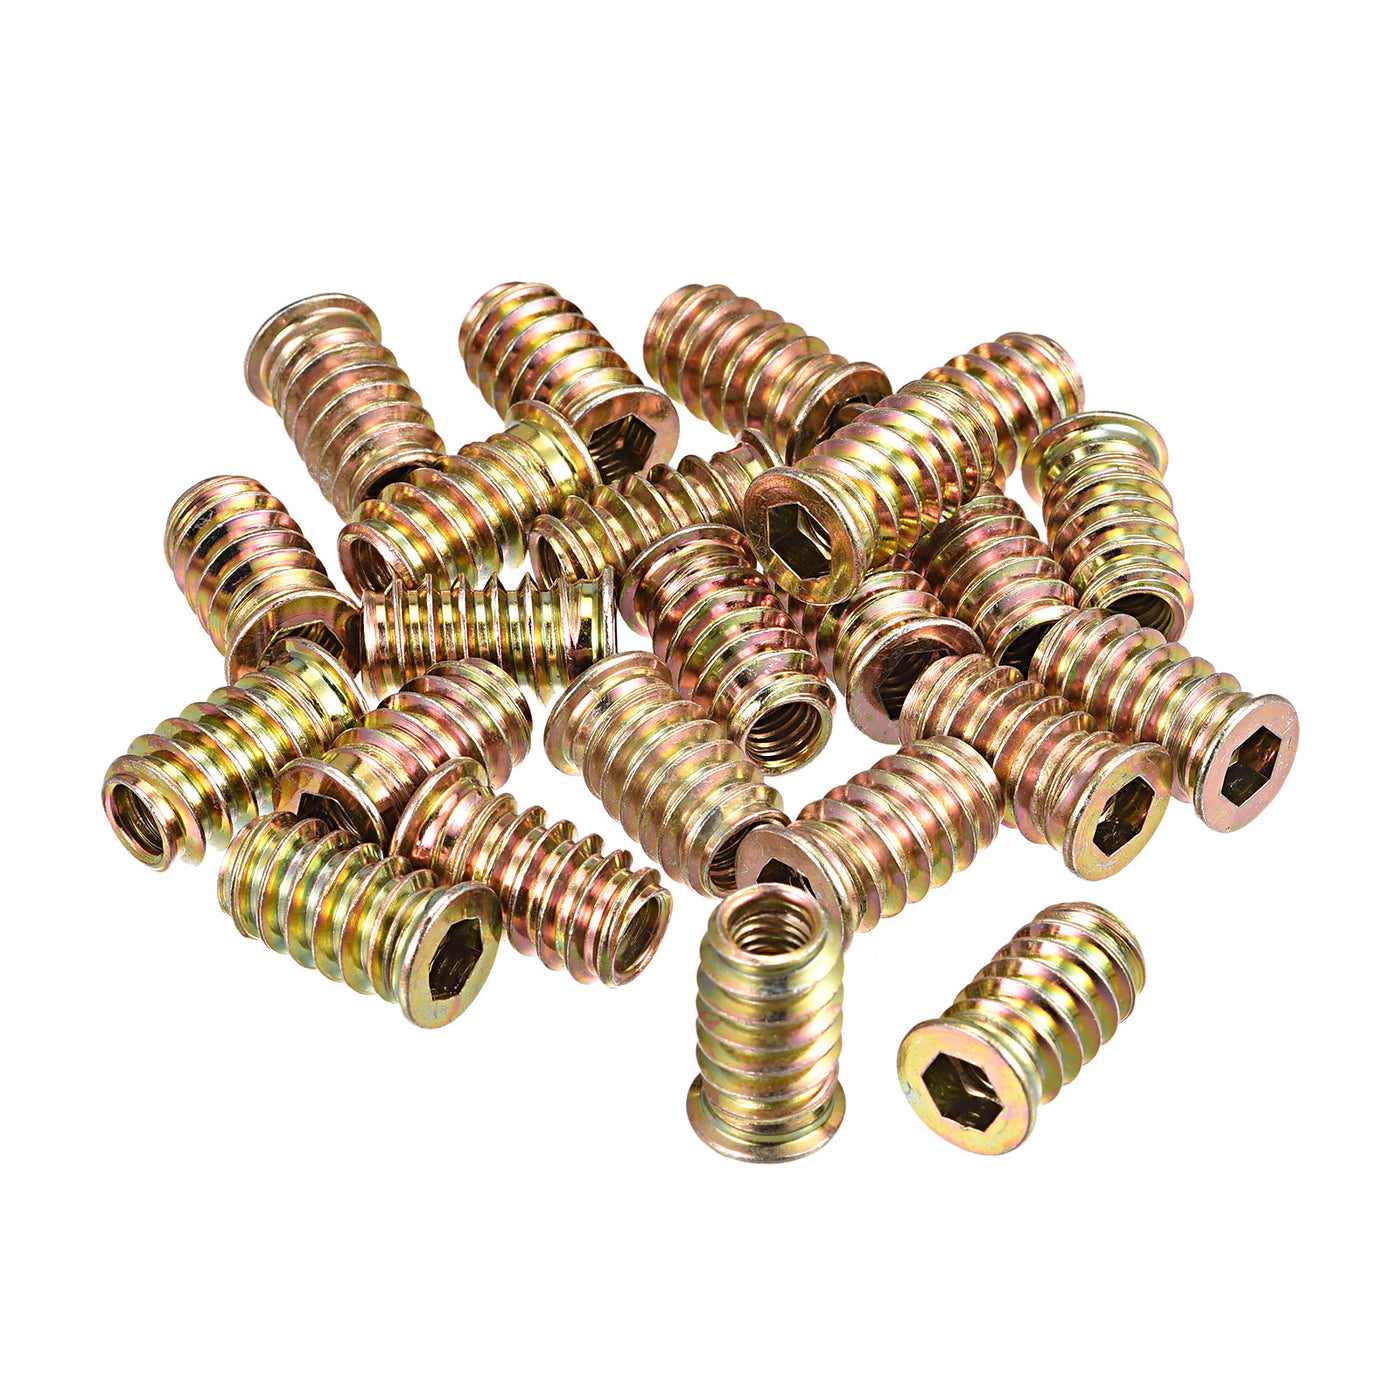 uxcell Uxcell M6x20mm Threaded Inserts for Wood Hex Socket Drive Furniture Screw-in Nut 24pcs